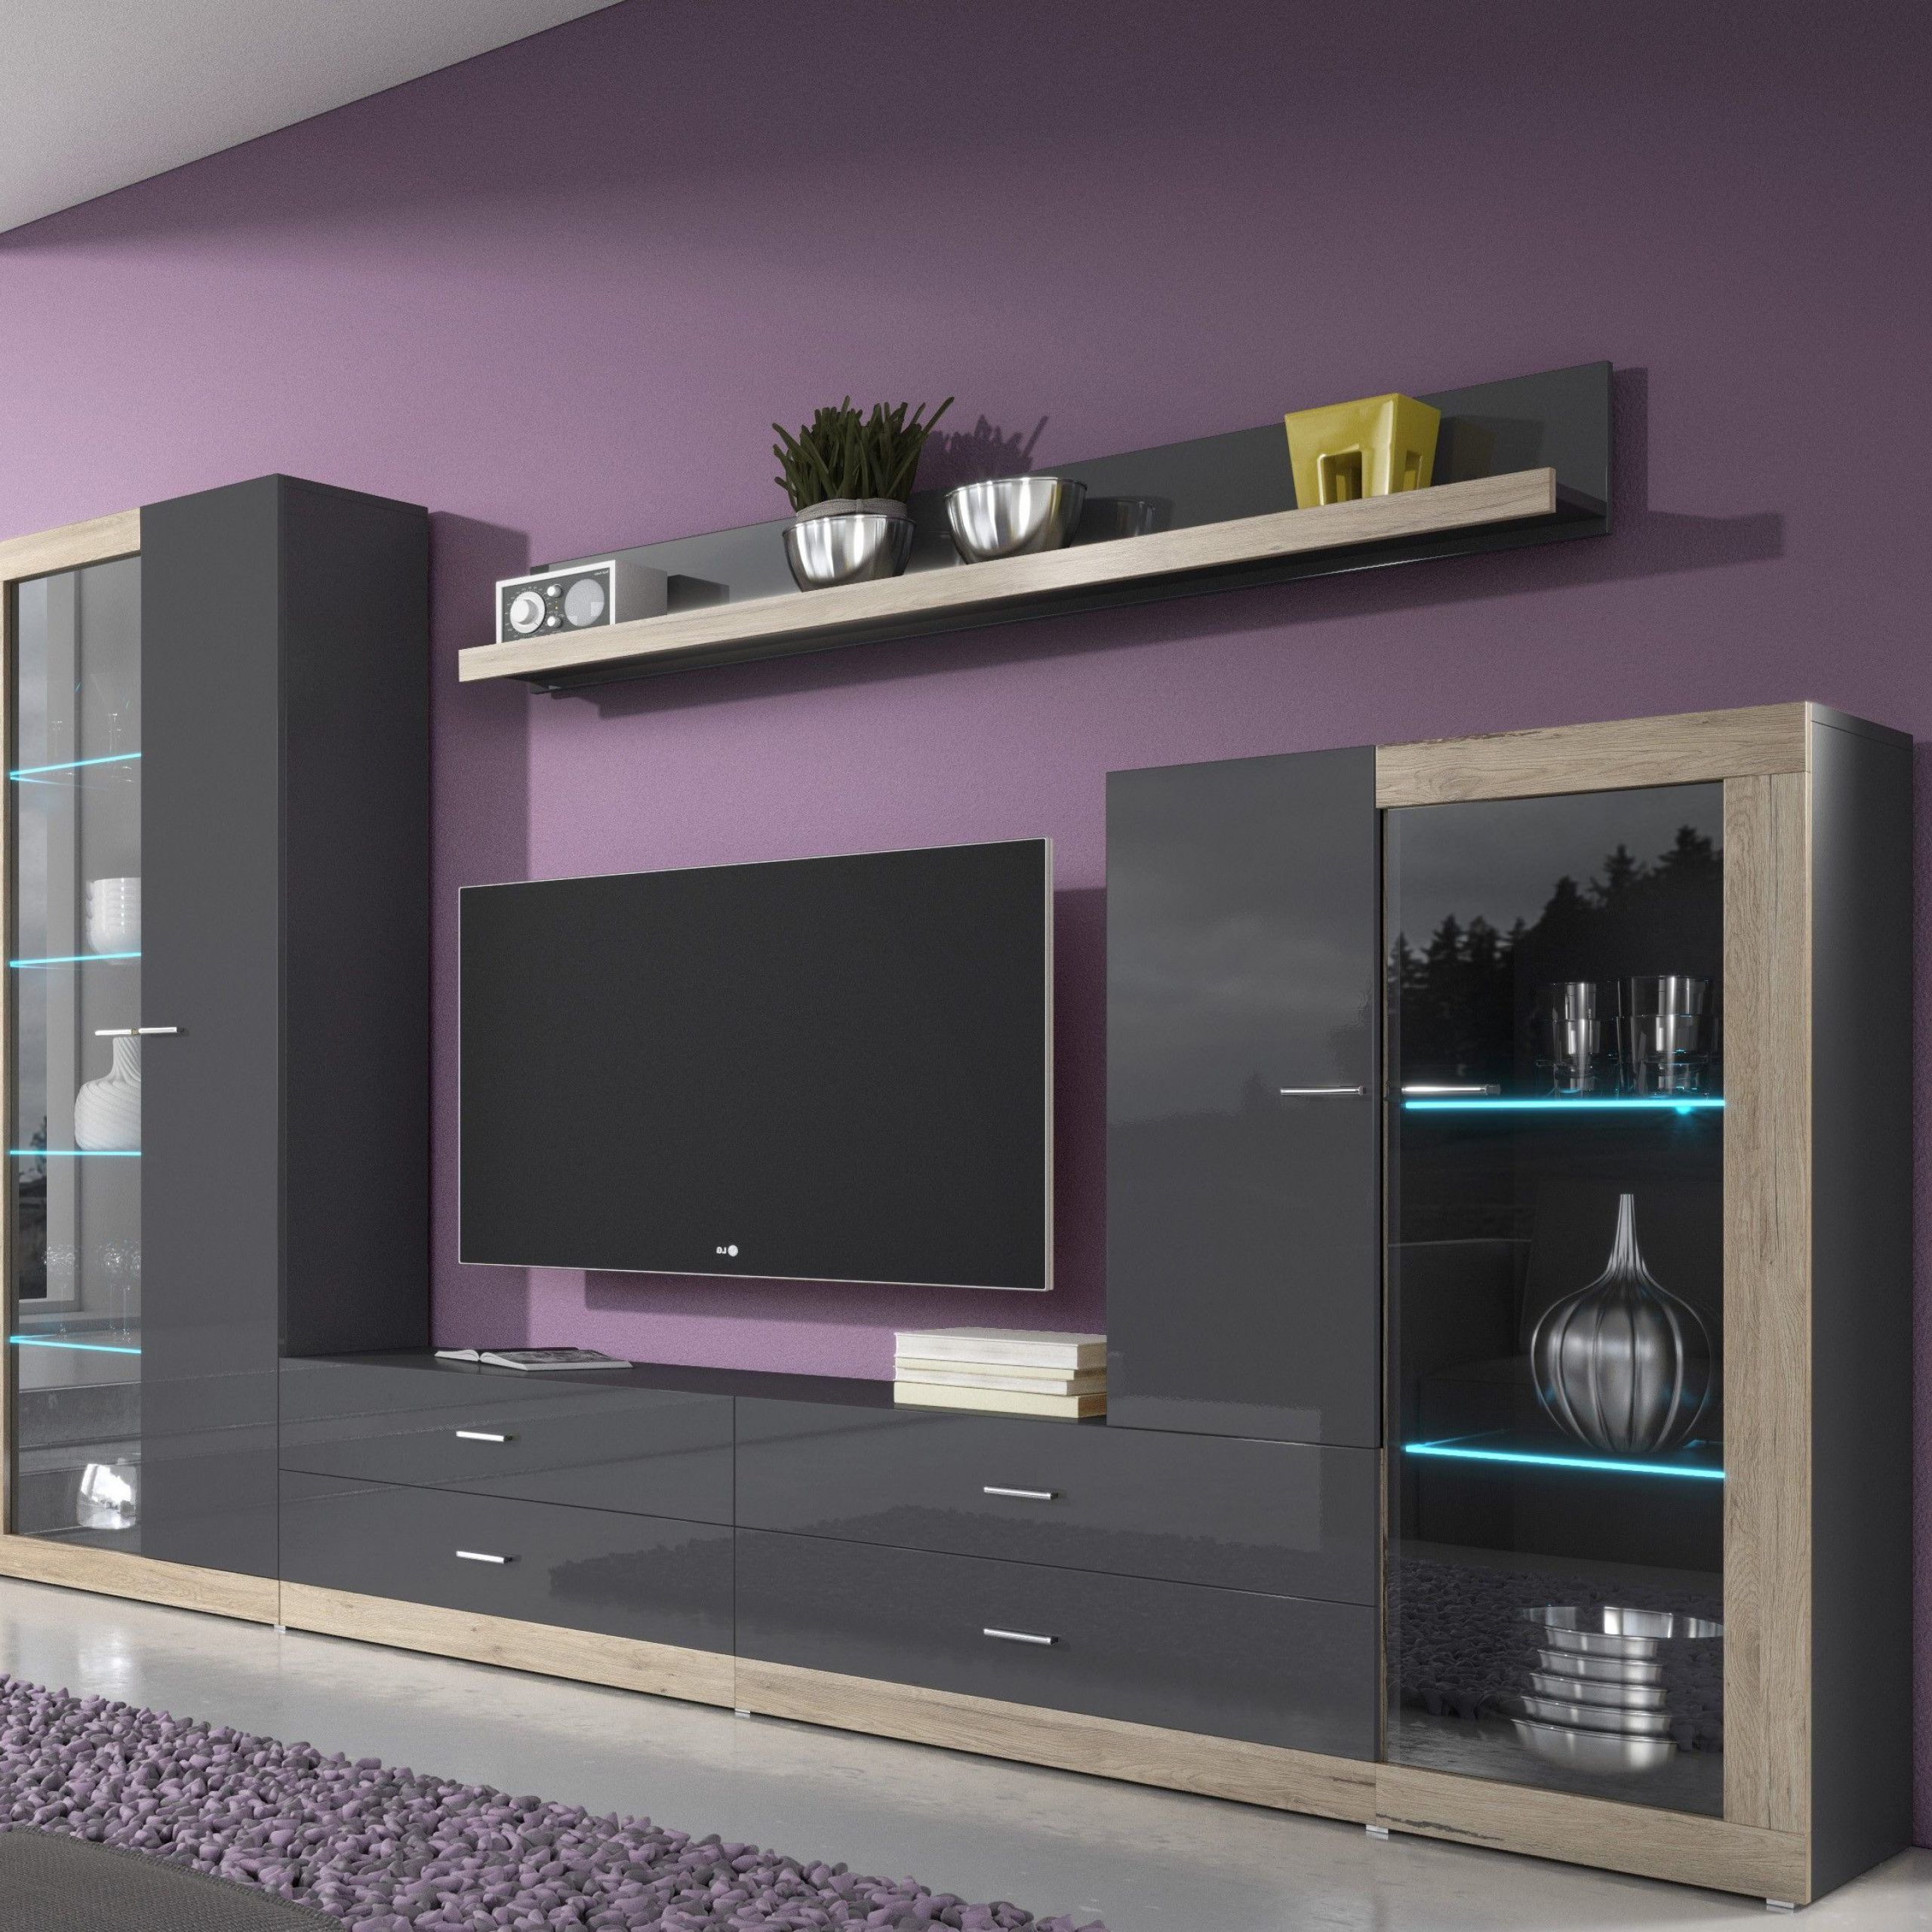 Wall Unit Tessa 1 | Living Room Wall Units, Bedroom Wall With Regard To High Glass Modern Entertainment Tv Stands For Living Room Bedroom (View 14 of 20)